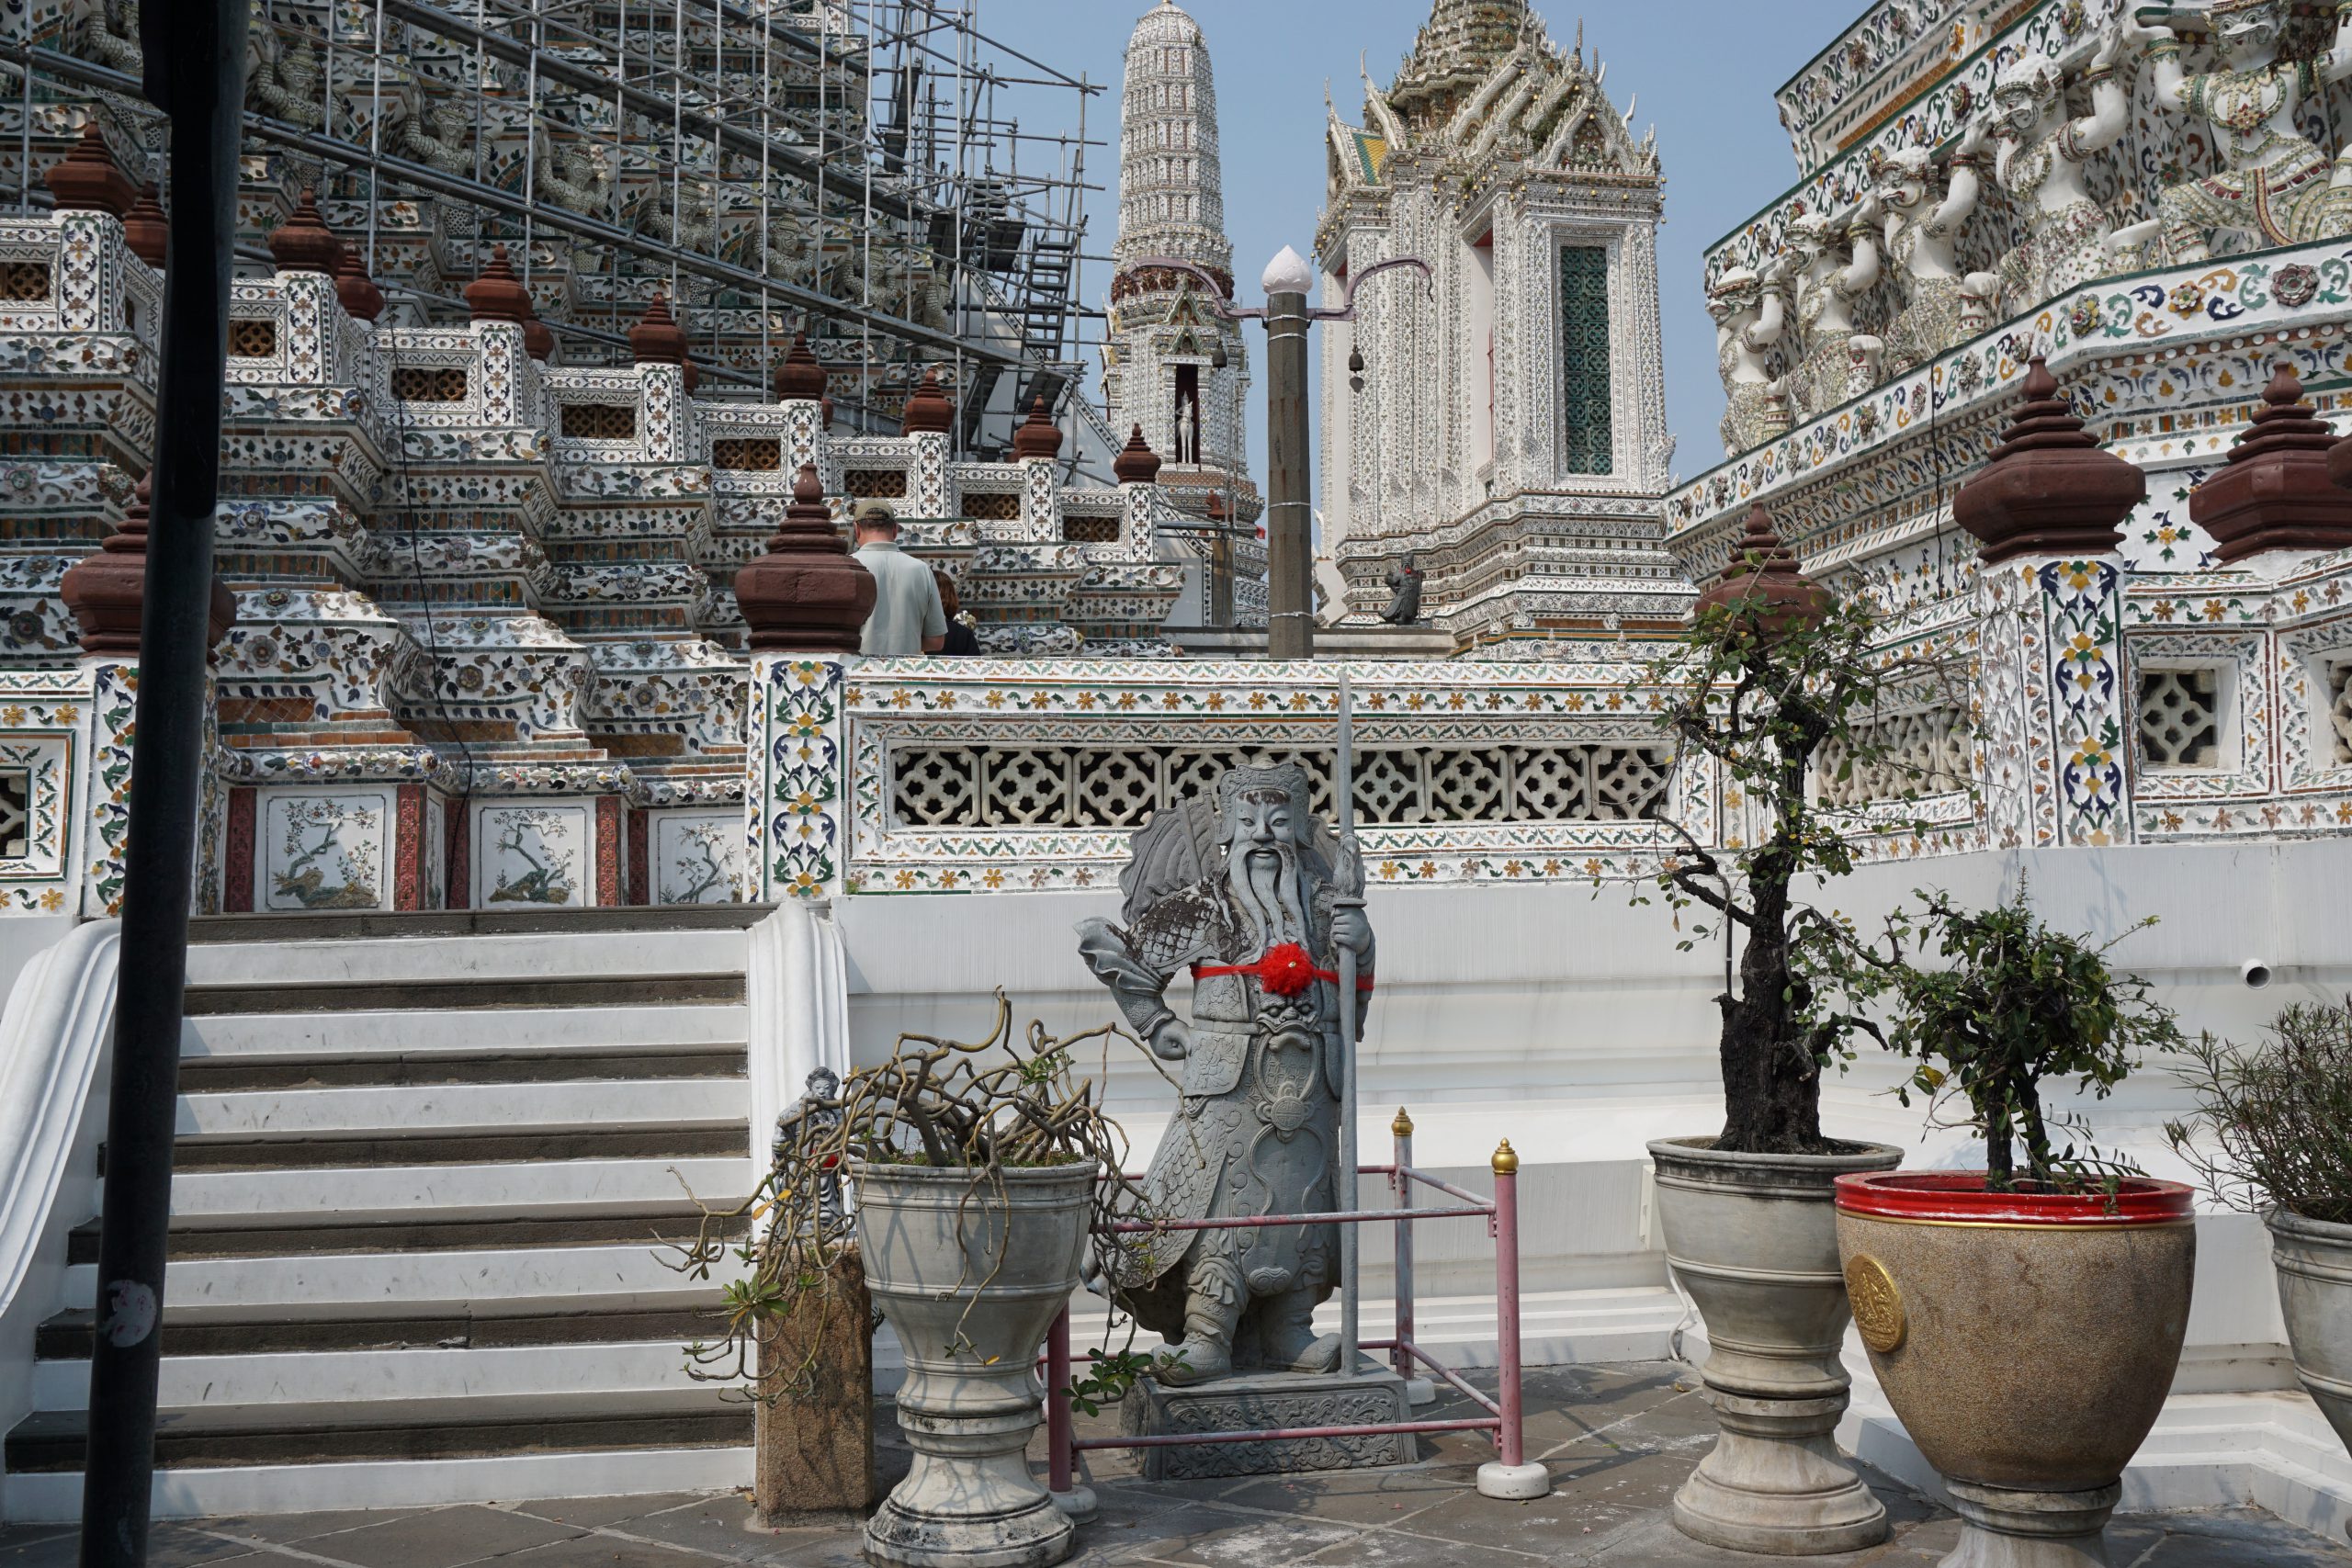 Thailand is Buddistic and this is Wat Arun, Temple of Dawn, at the other Riverside in Bangkok | Thailand